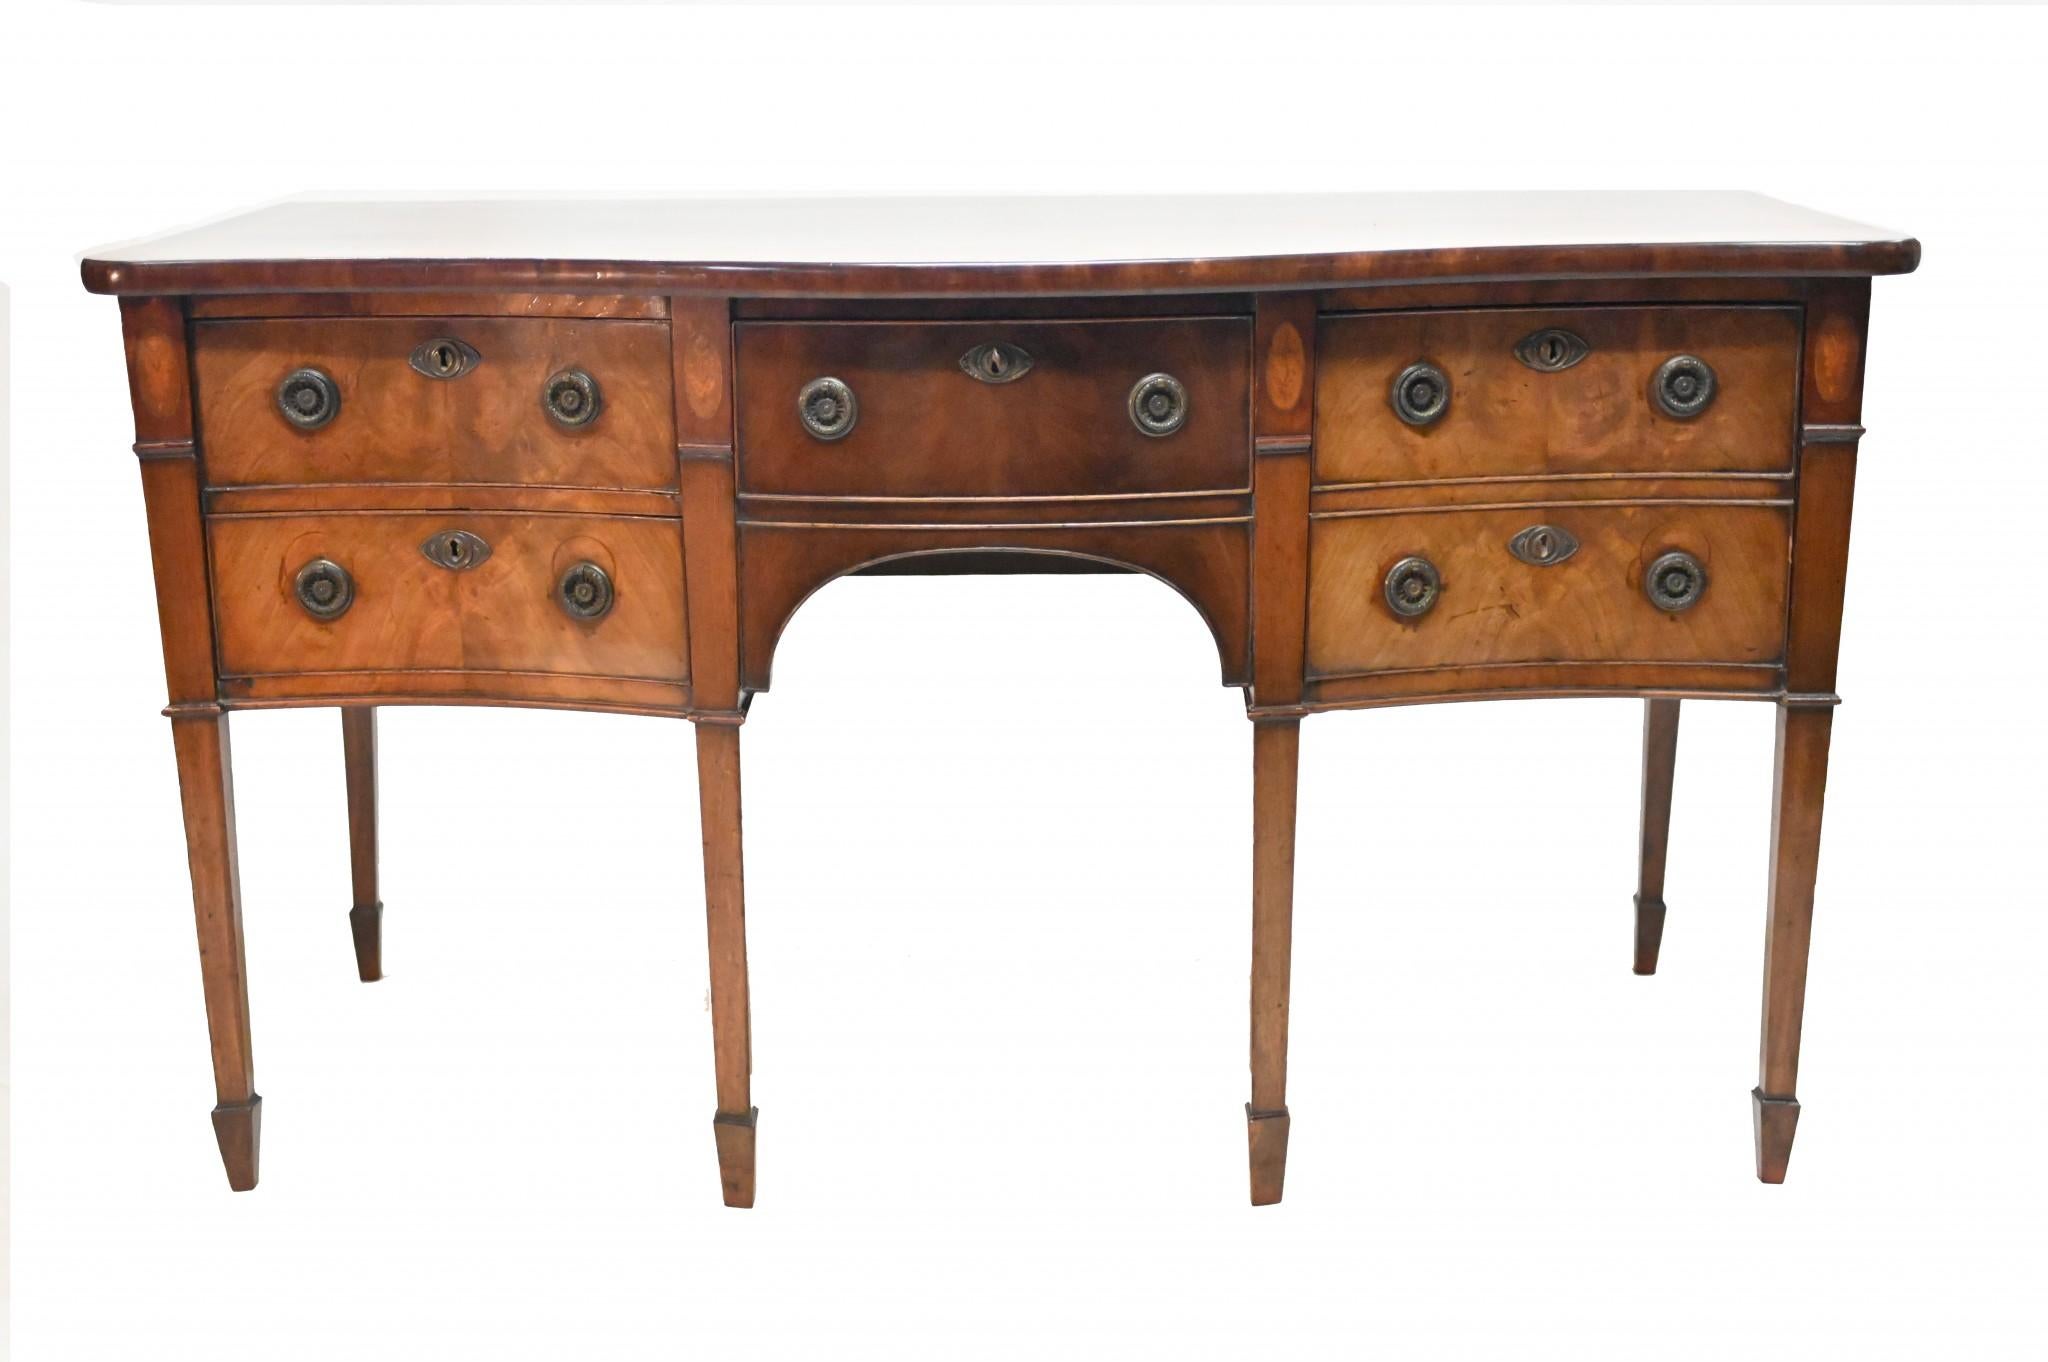 Refined Georgian sideboard in mahogany of serpentine form
Original handles with inlaid patera beside drawers
Circa 1810
Classically refined design with five drawers so ample storage
Classic piece of English antique furniture Viewings available by